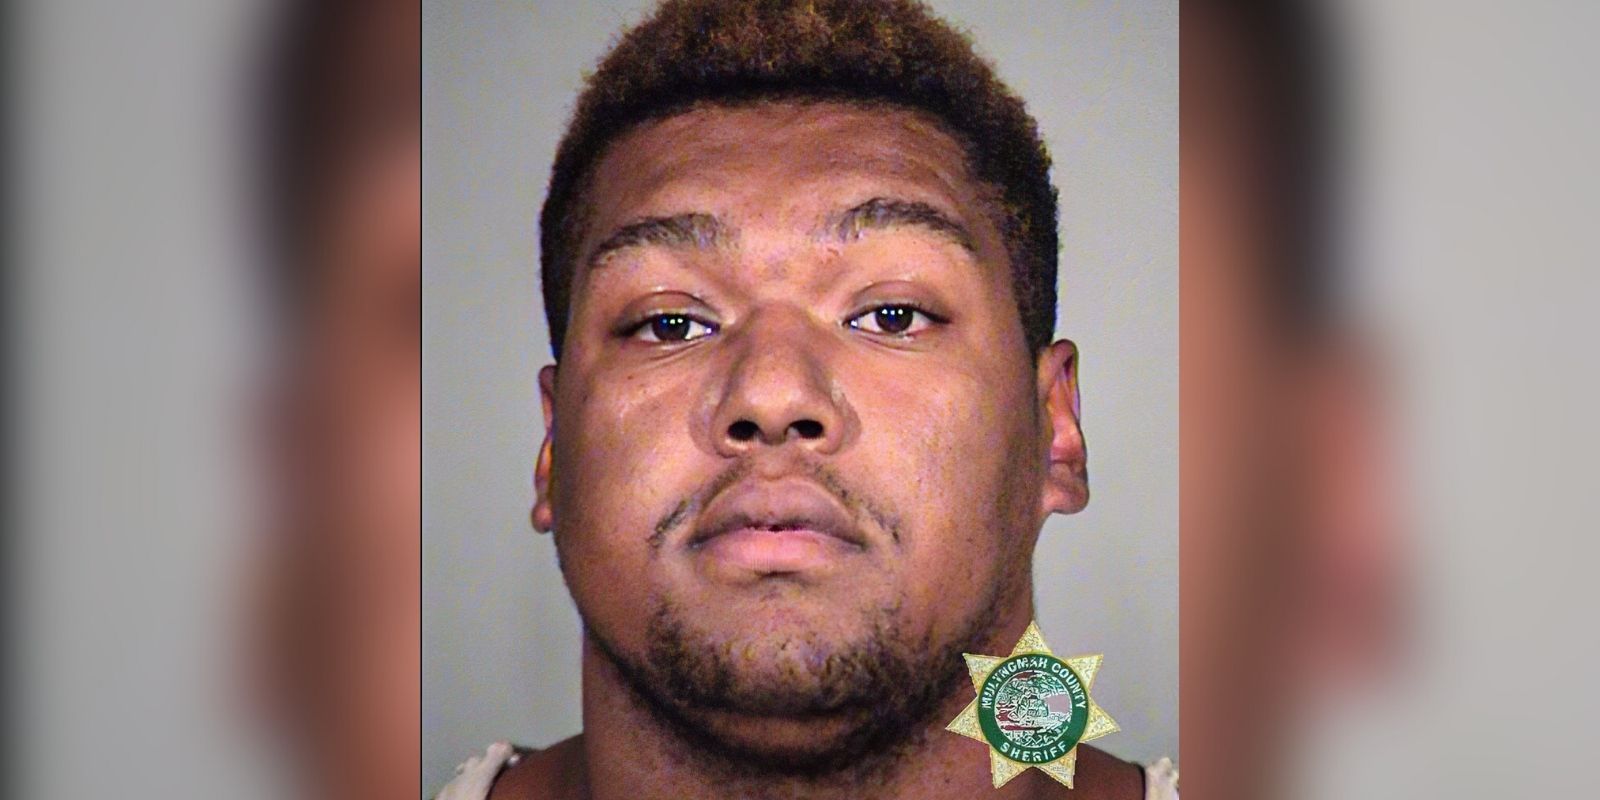 BLM rioter sentenced to 5 years in prison for setting Portland police building on fire